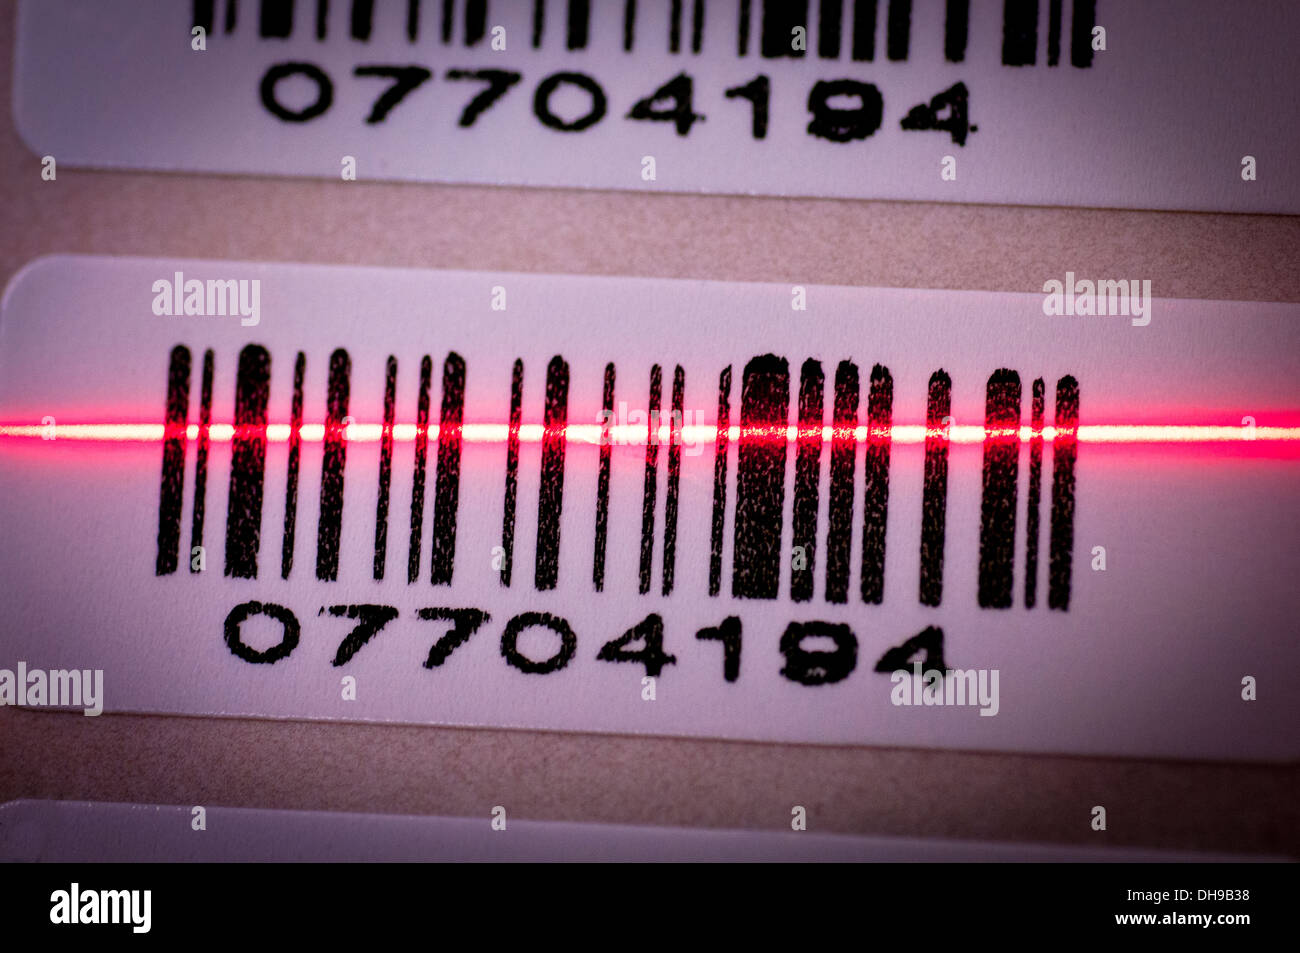 A barcode being scanned Stock Photo